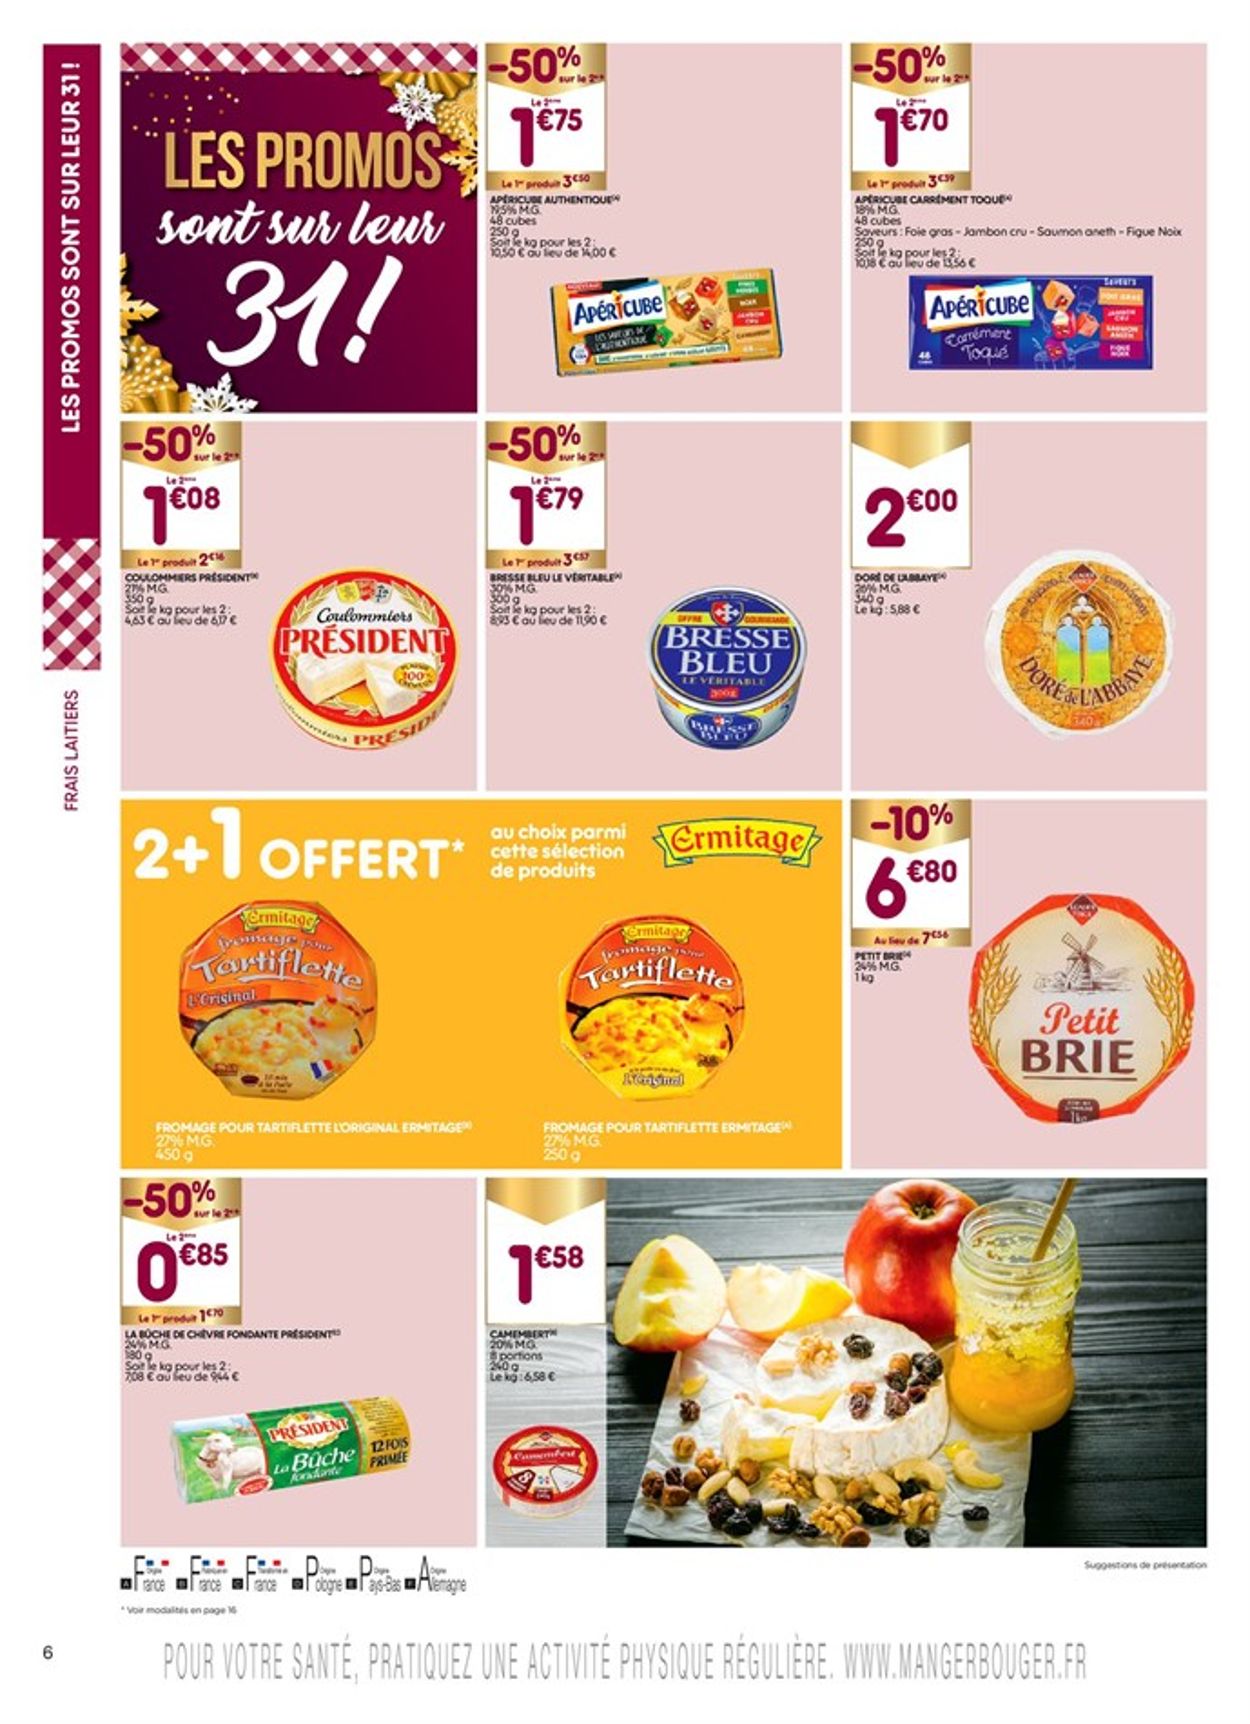 Leader Price Les promos 2020 Catalogue - 21.12-03.01.2021 (Page 6)